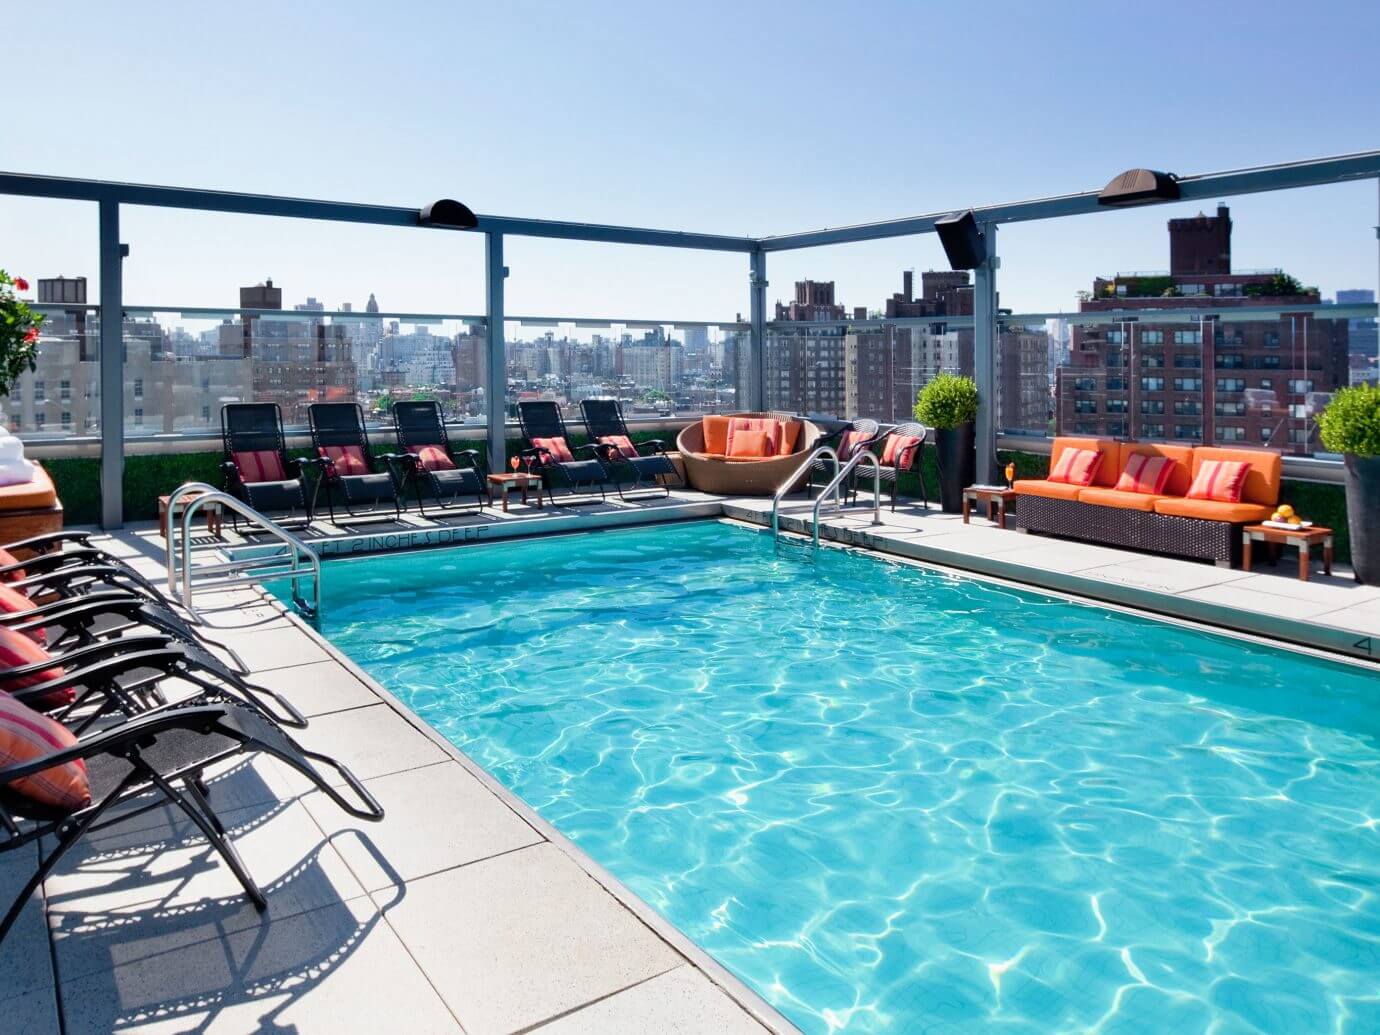 A swimming pool with lounge chairs and a view of the city
